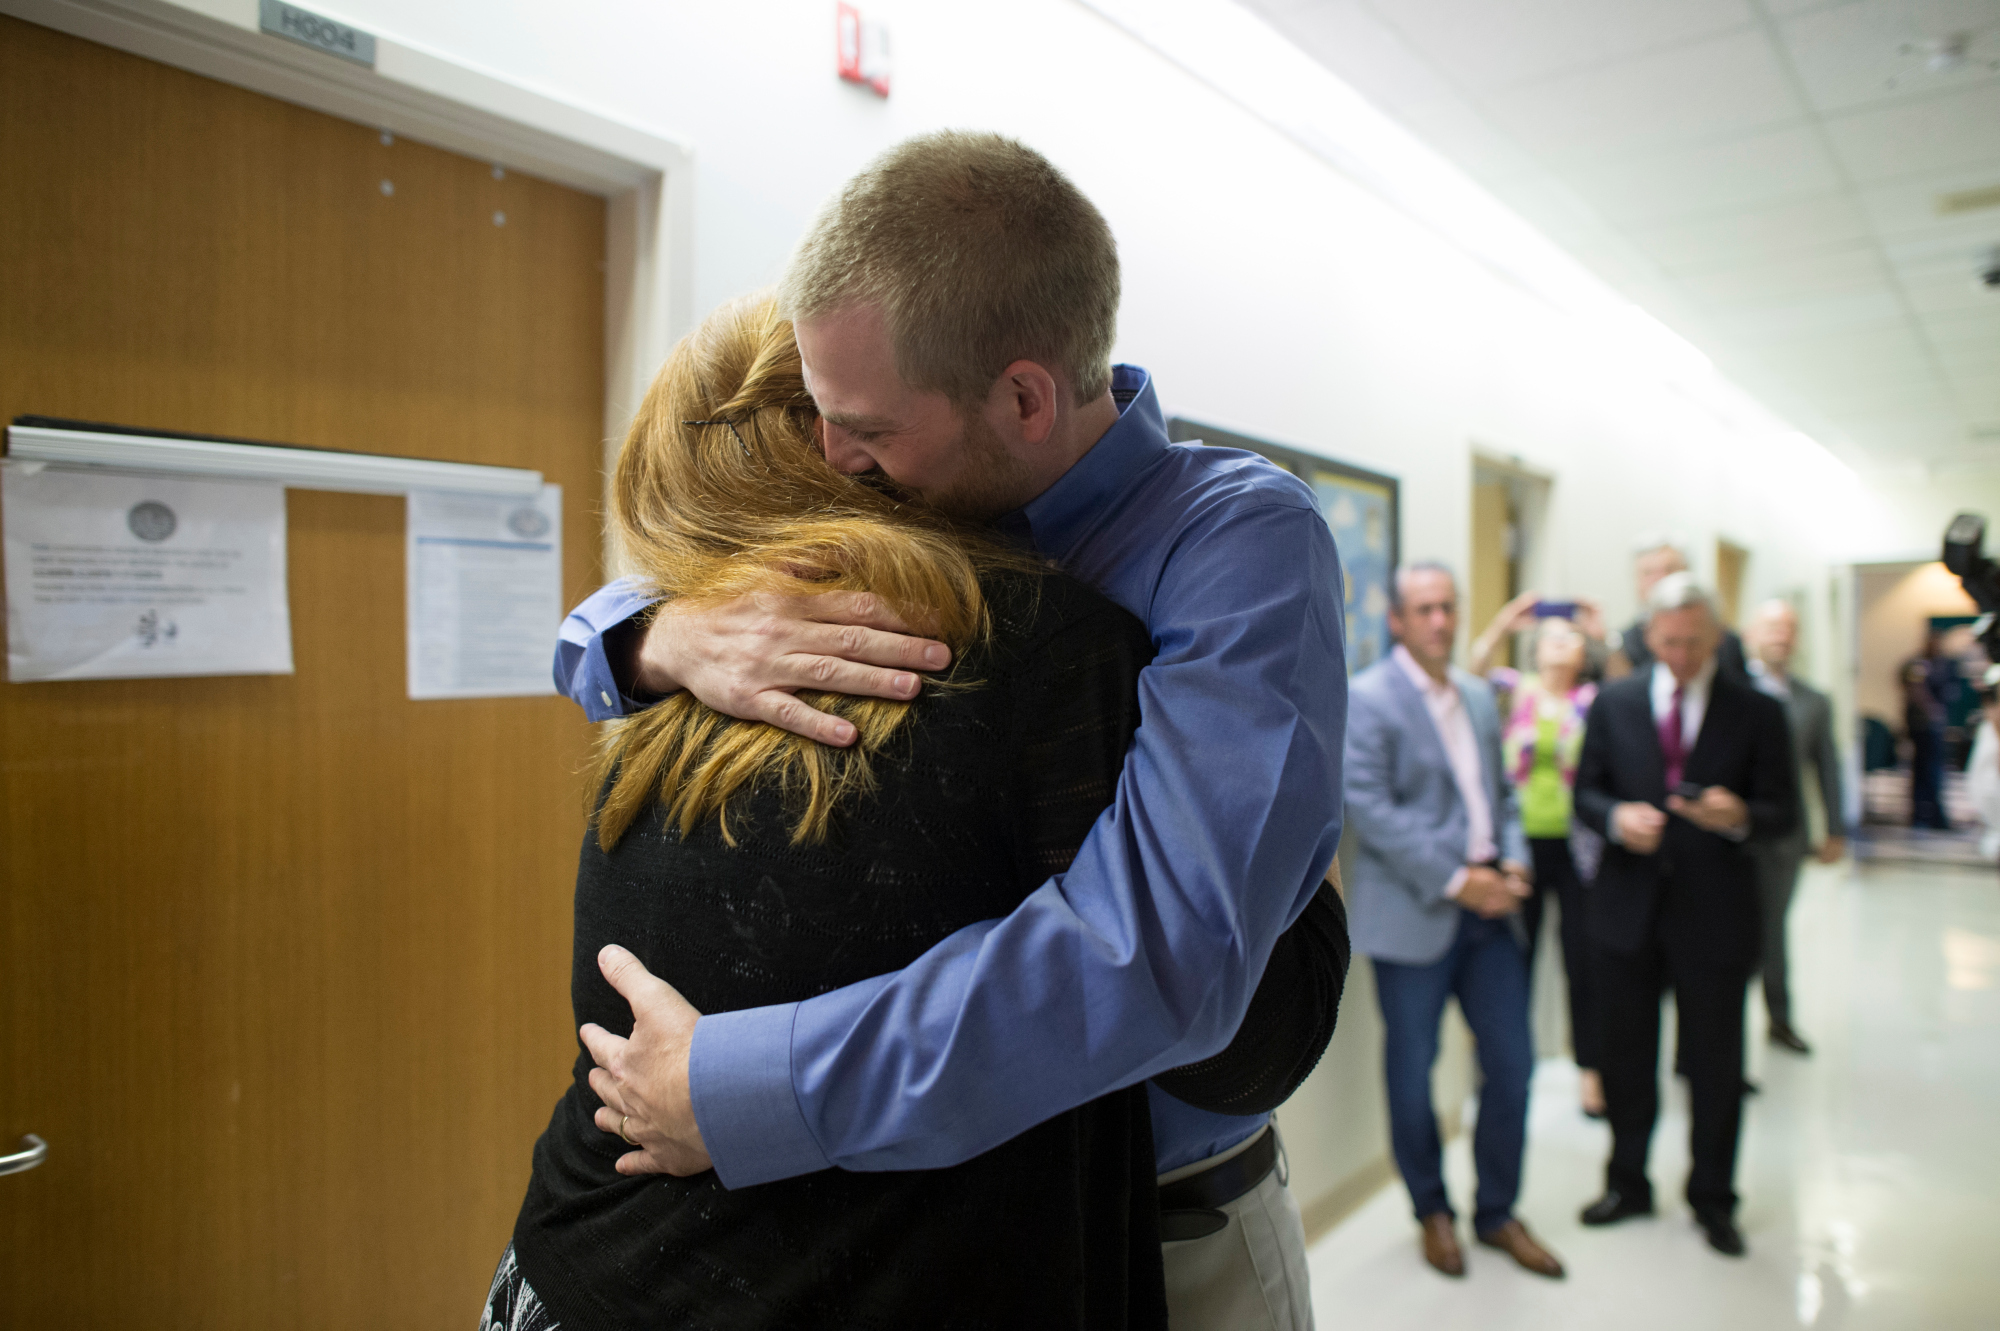 DR. KENT BRANTLY EXPLAINS HOW IT FEELS LIKE TO SURVIVE EBOLA